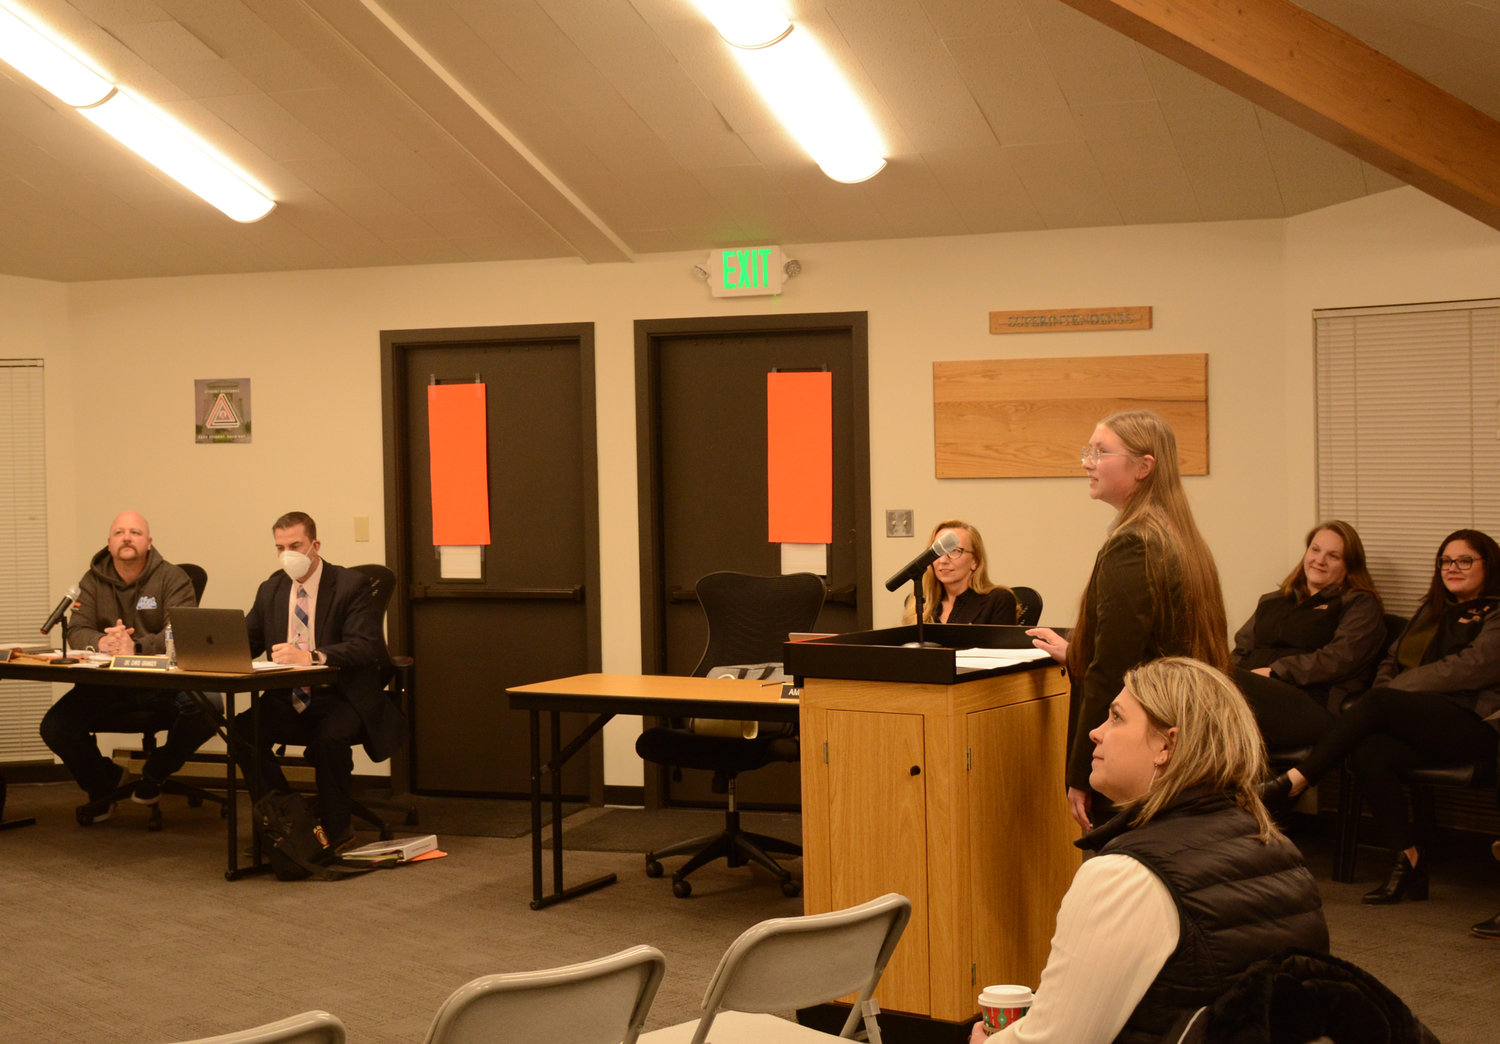 Blaine High School Associated Student Body (ASB) president Sabrina Boczek addresses the Blaine school board at its November 28 meeting. Boczek presented on the ASB’s active clubs and events planned or already accomplished for the student body. Accomplished events included the lip dub, “Are You Smarter Than A Fifth Grader” assembly and homecoming. Blaine High School also has a wide variety of clubs that fall into community service, mental health, academic, and career and technical student organization clubs.